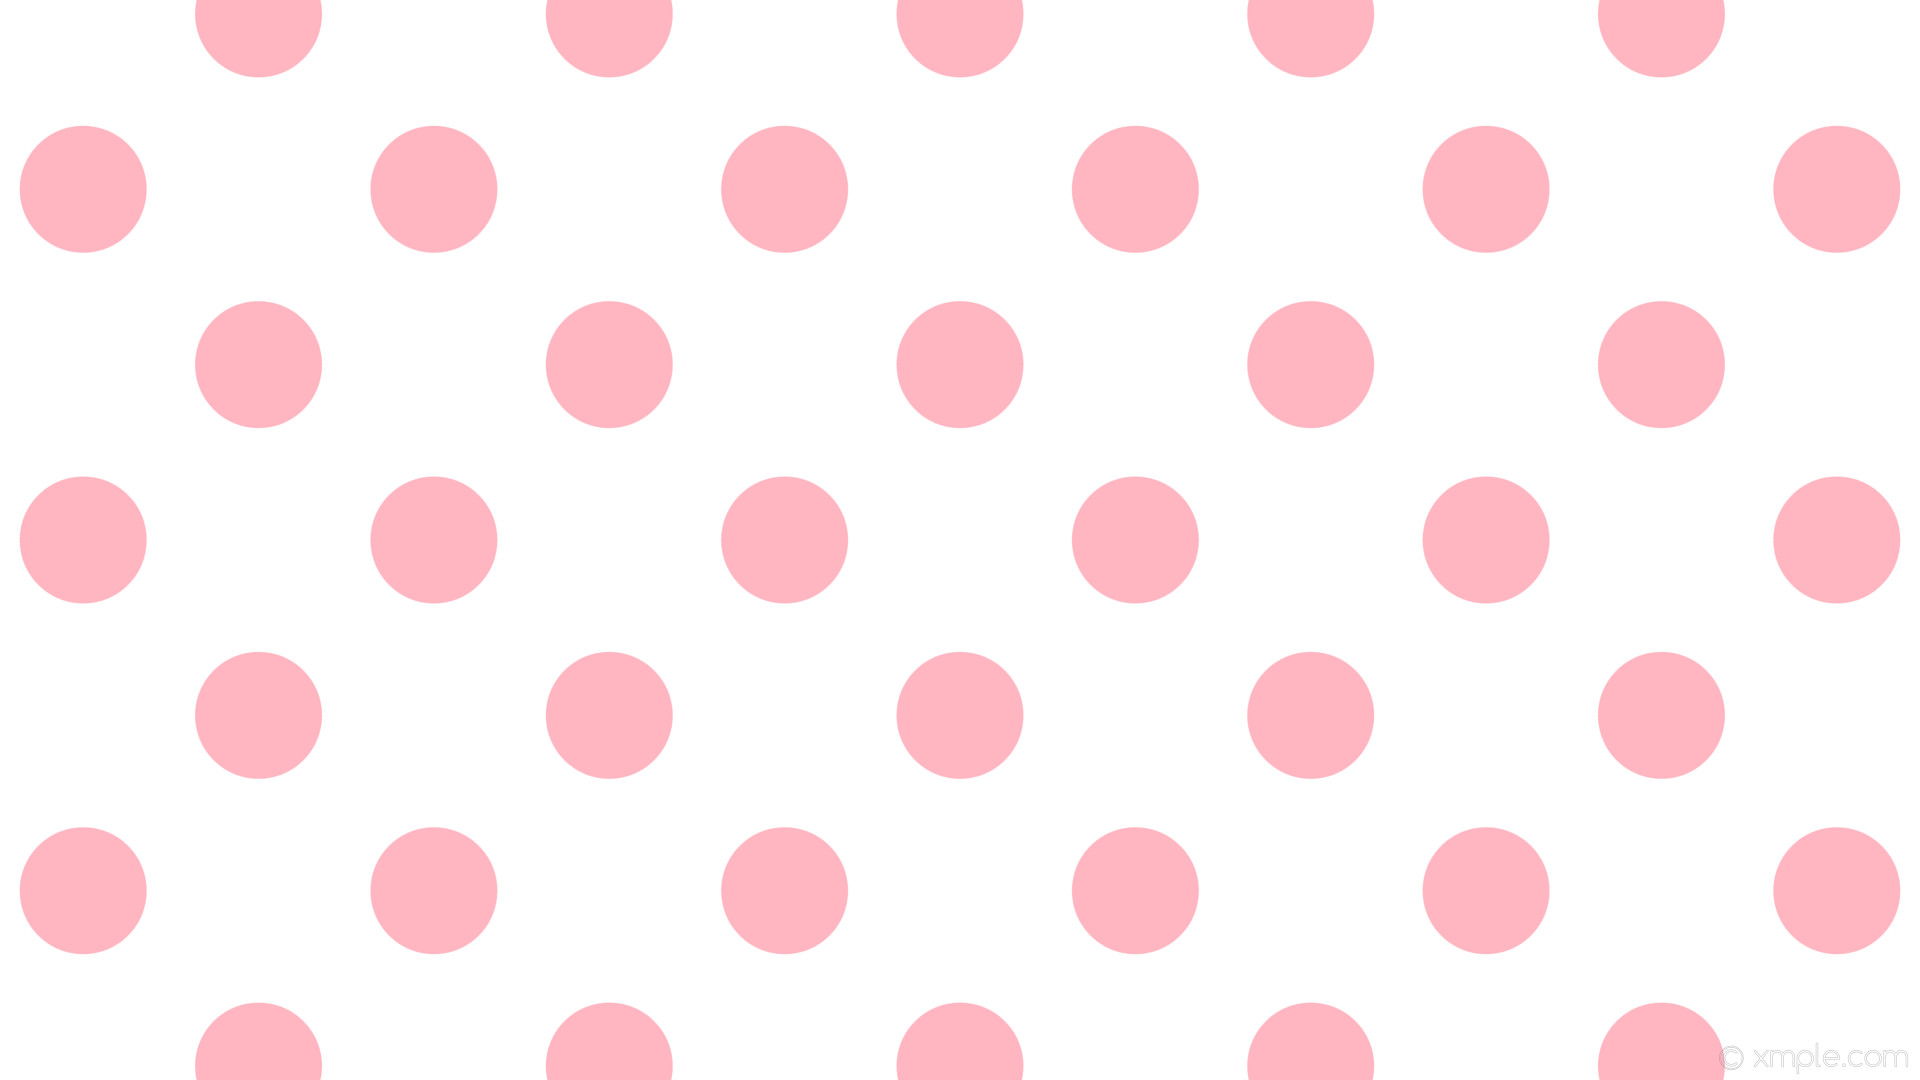 7. Minimalist Pink and White Polka Dot Nail Design for Everyday Wear - wide 1